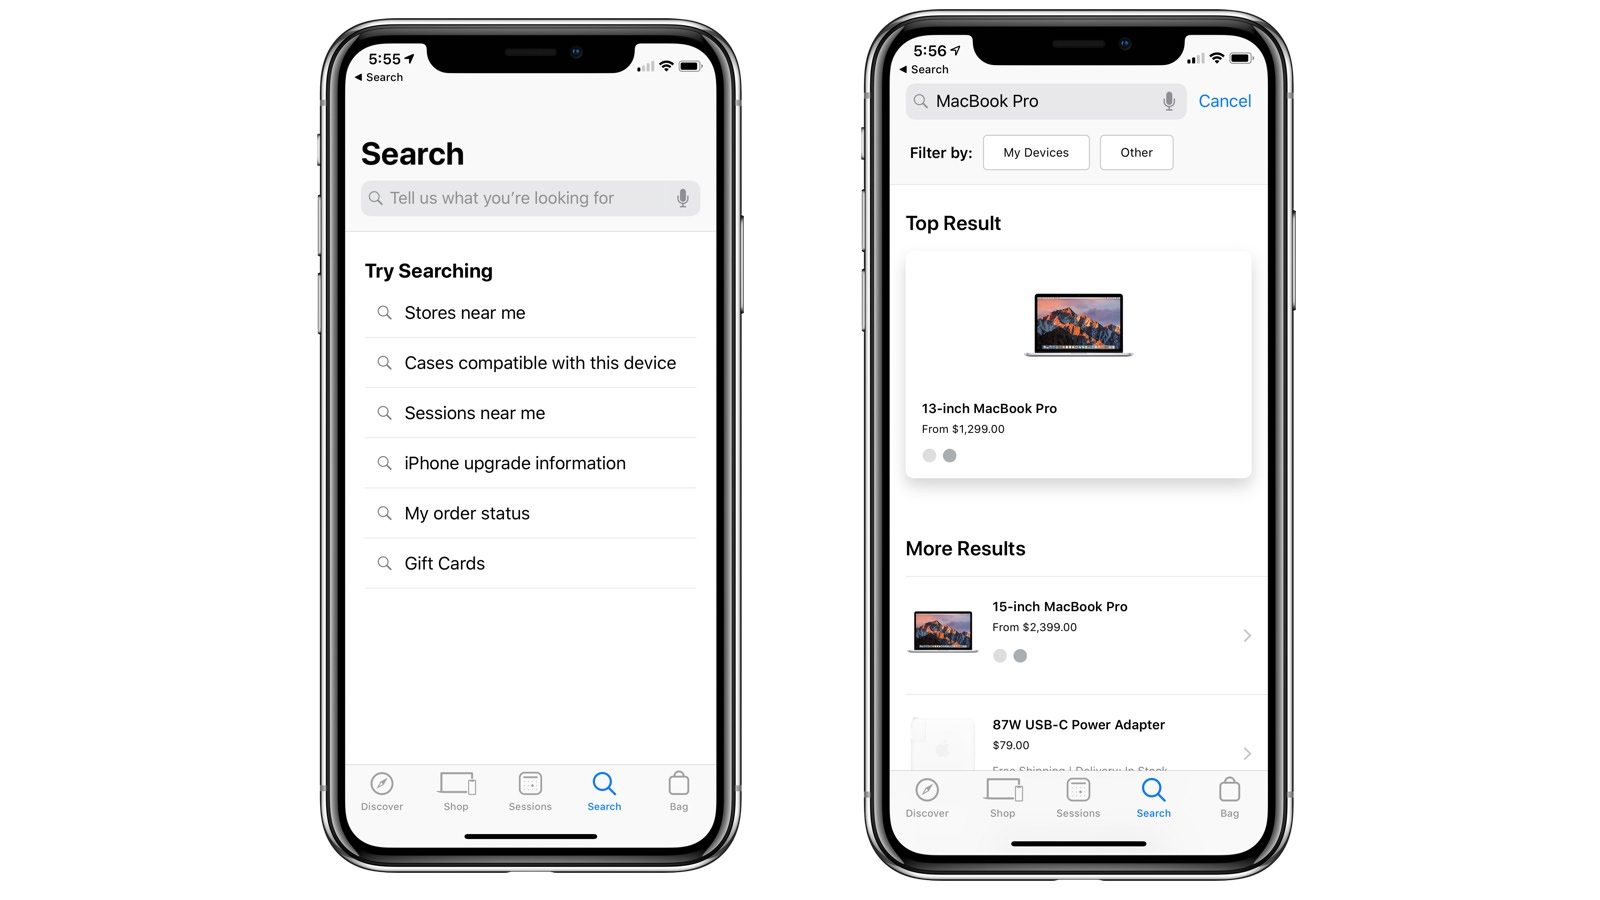 Apple Store App for iOS Update Brings Revamped Search Interface with Voice Support